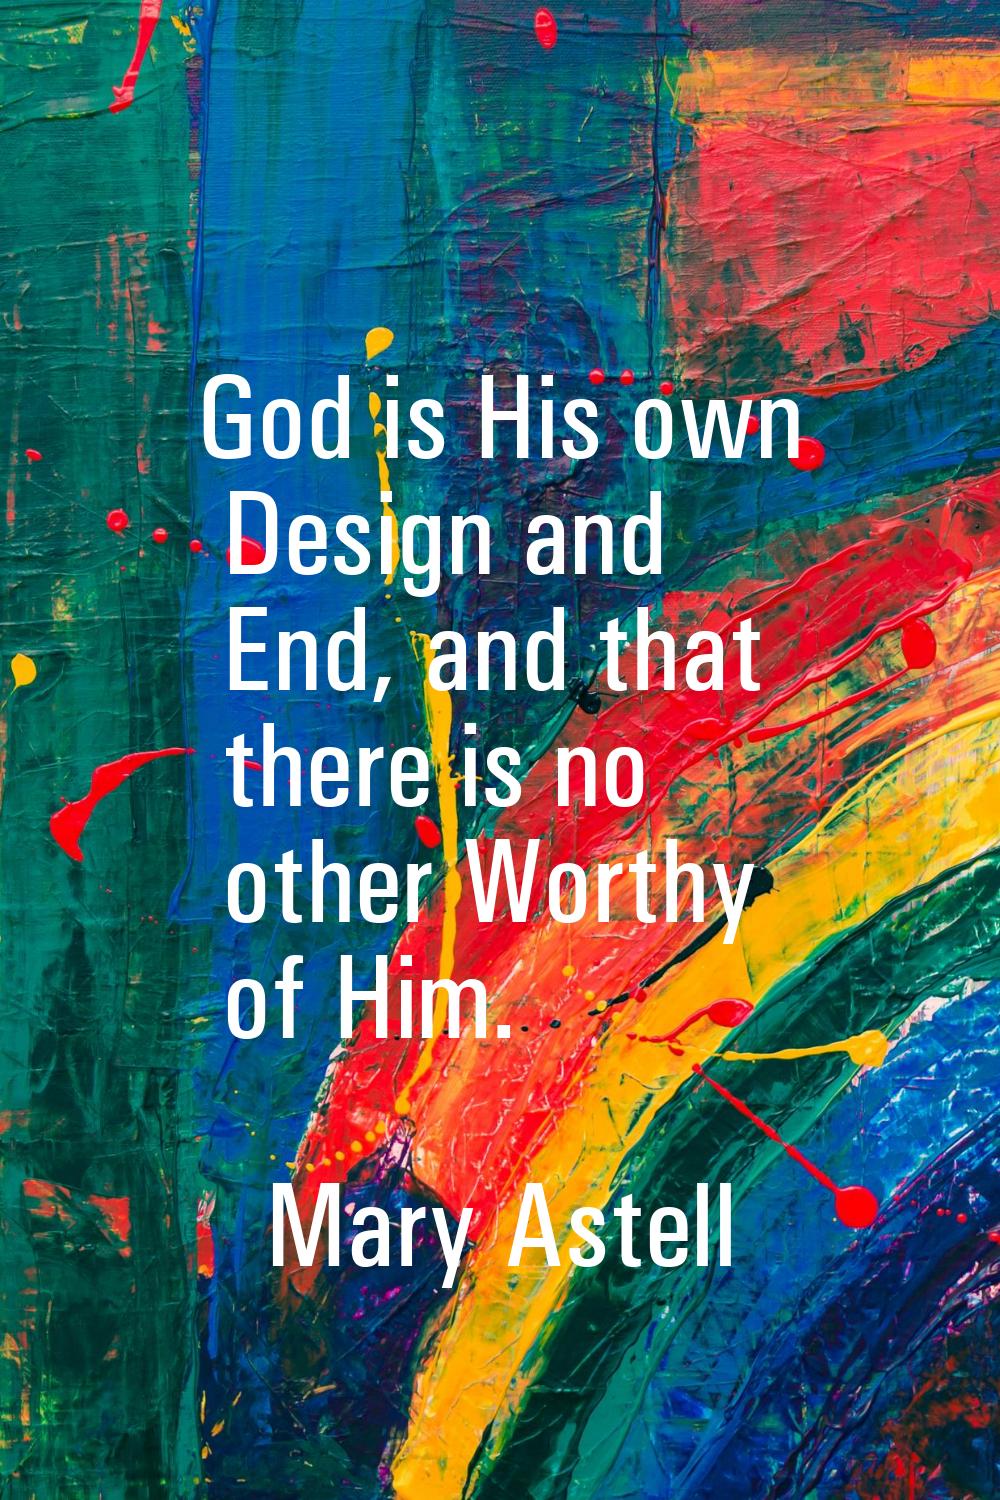 God is His own Design and End, and that there is no other Worthy of Him.